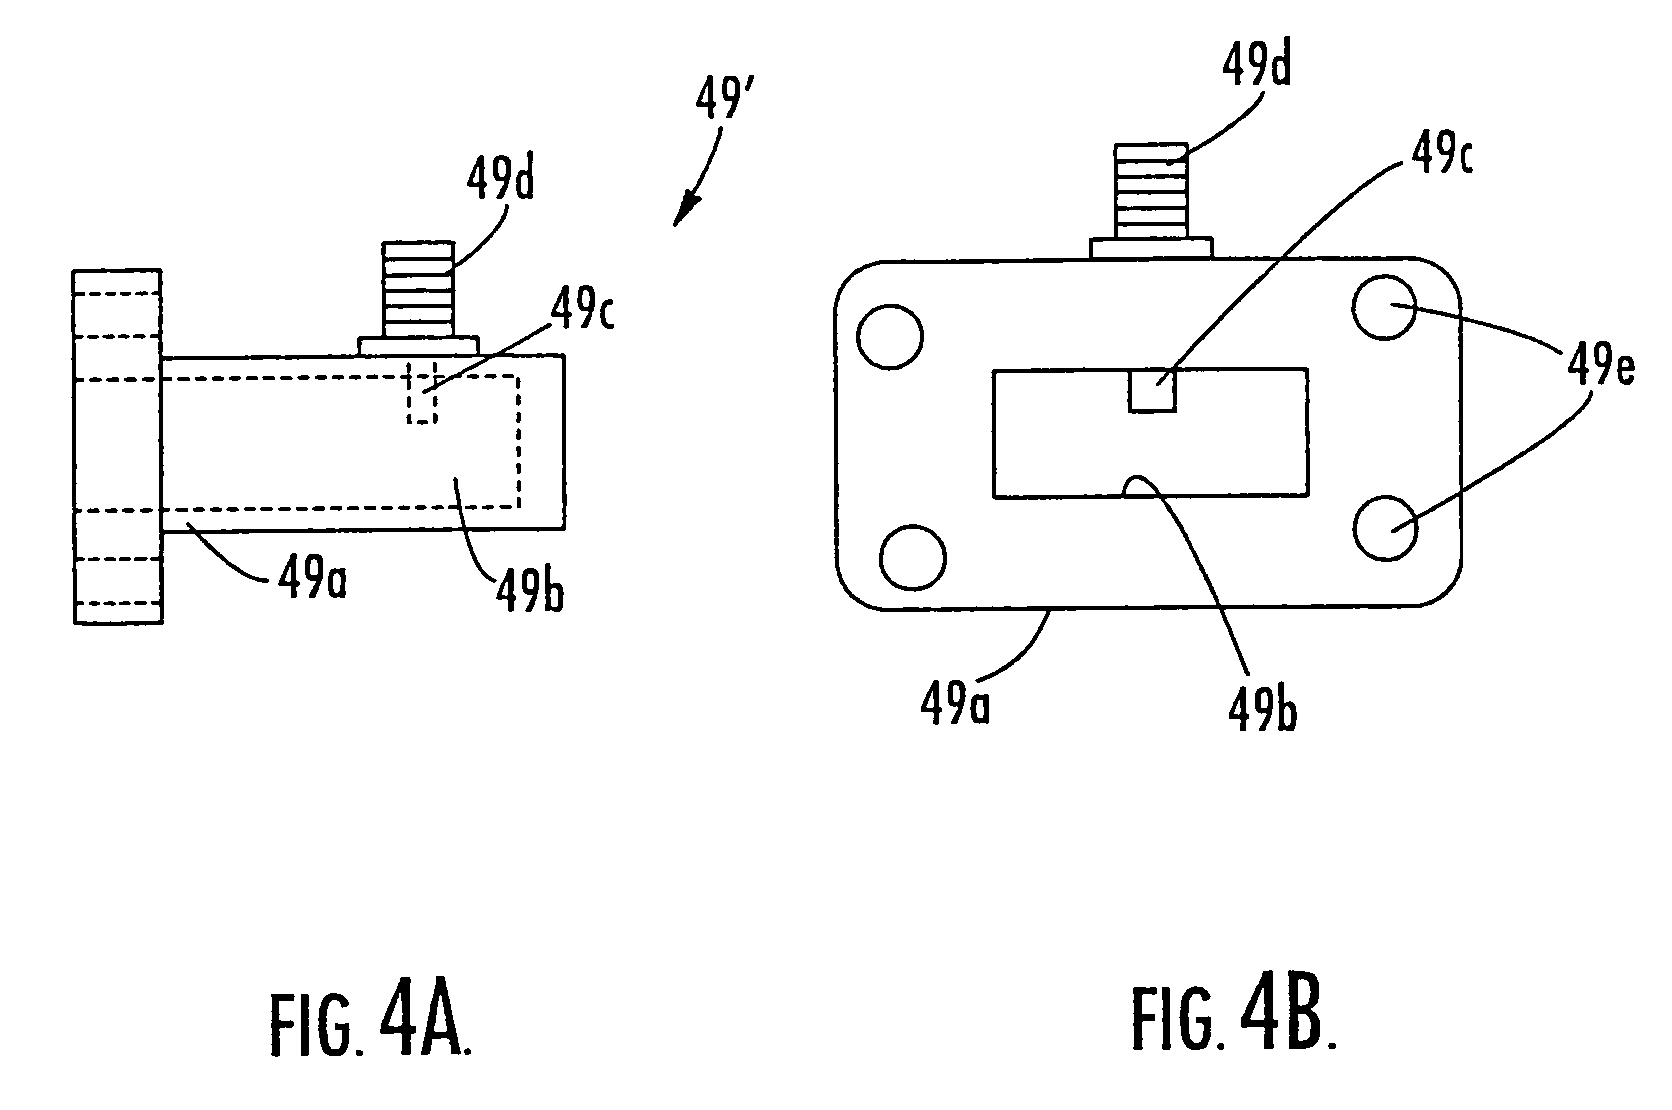 Microstrip-to-waveguide power combiner for radio frequency power combining